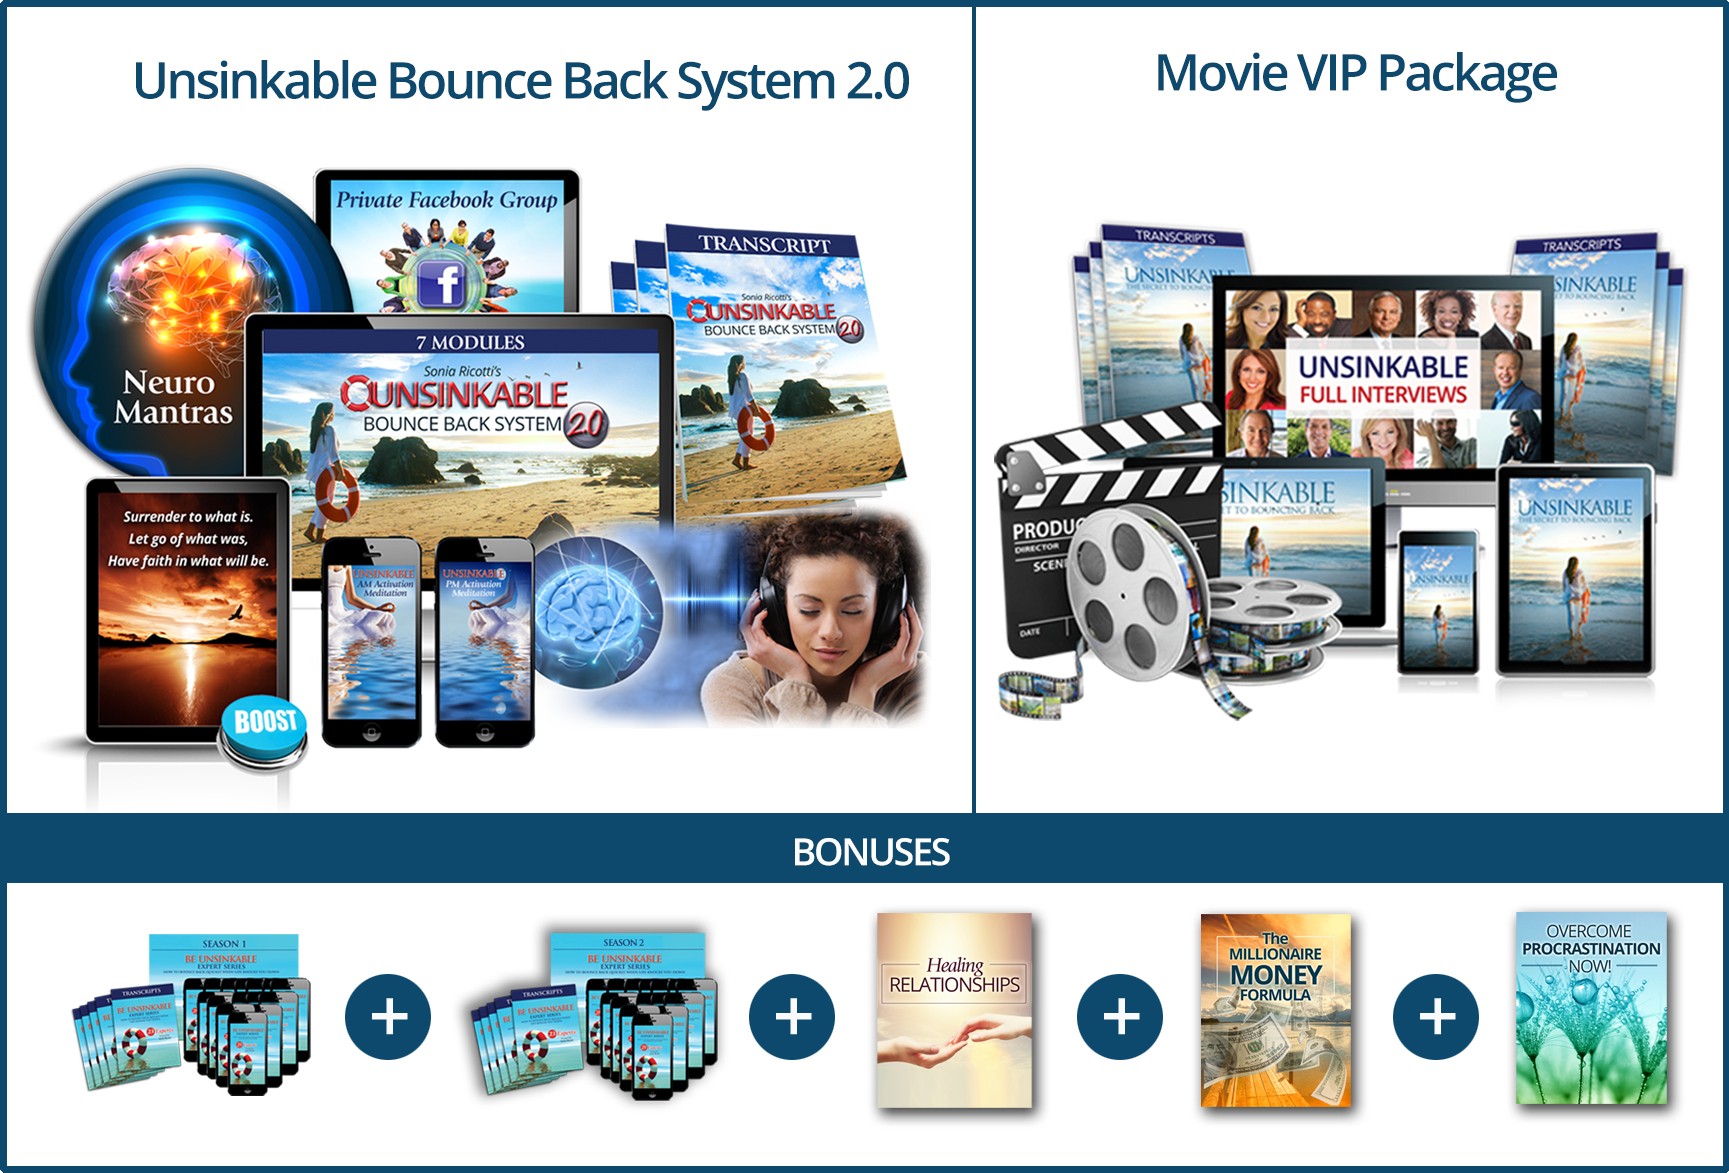 Product package overview